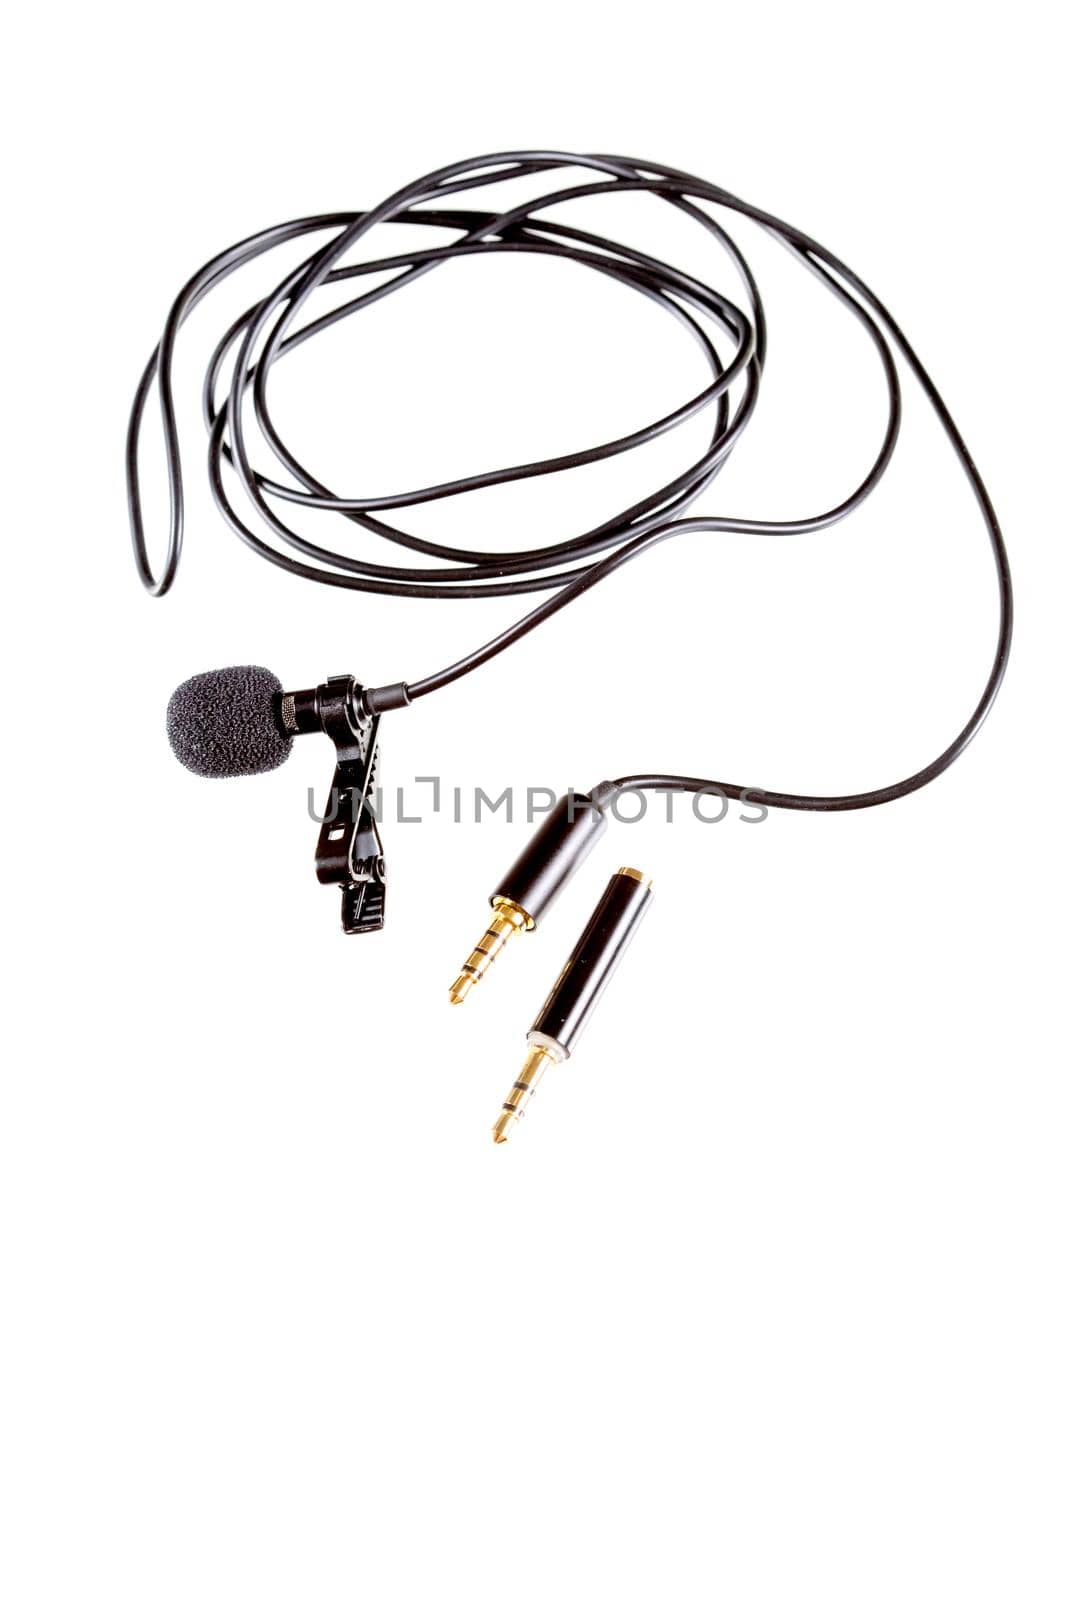 Small lavalier microphone or lapel mic with clip and adapter for computer by galinasharapova